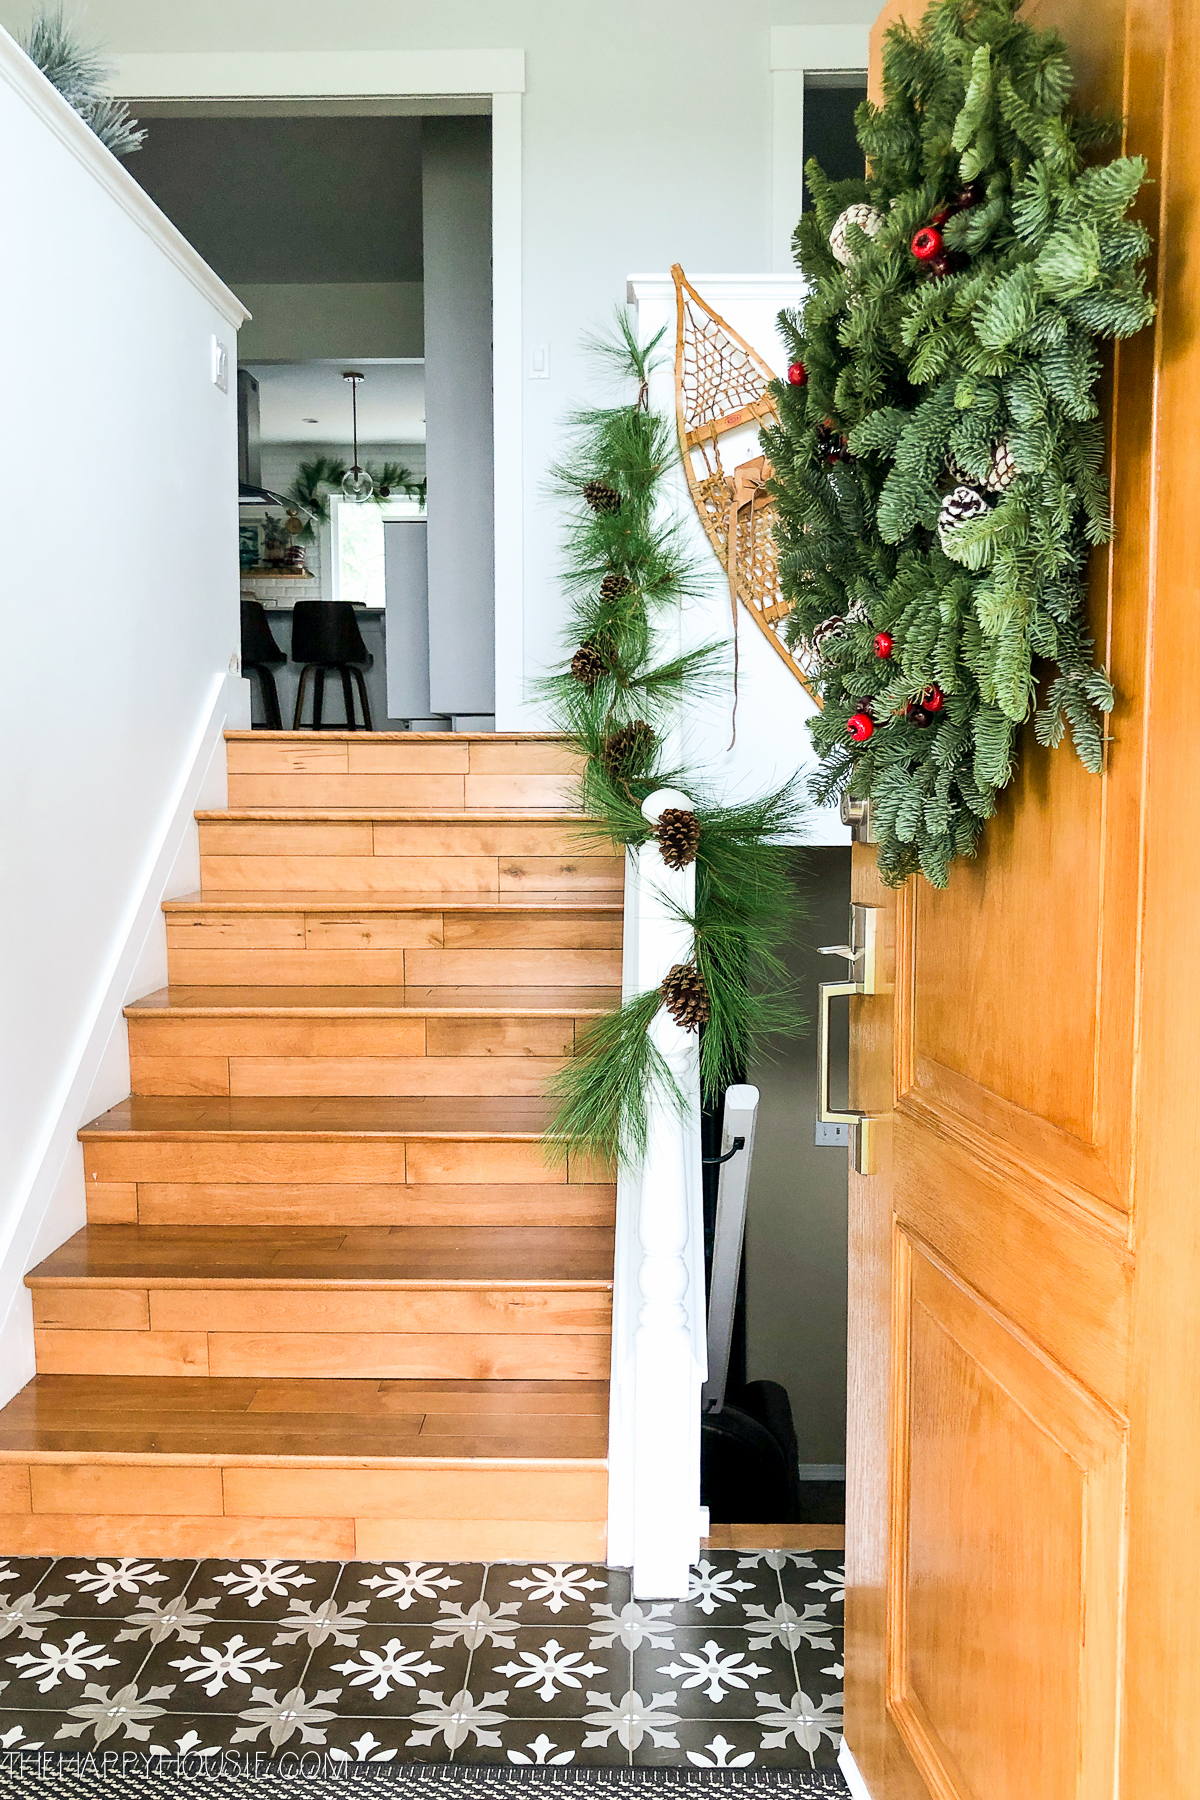 A green garland leading to the top of the stairs on the stairwell.